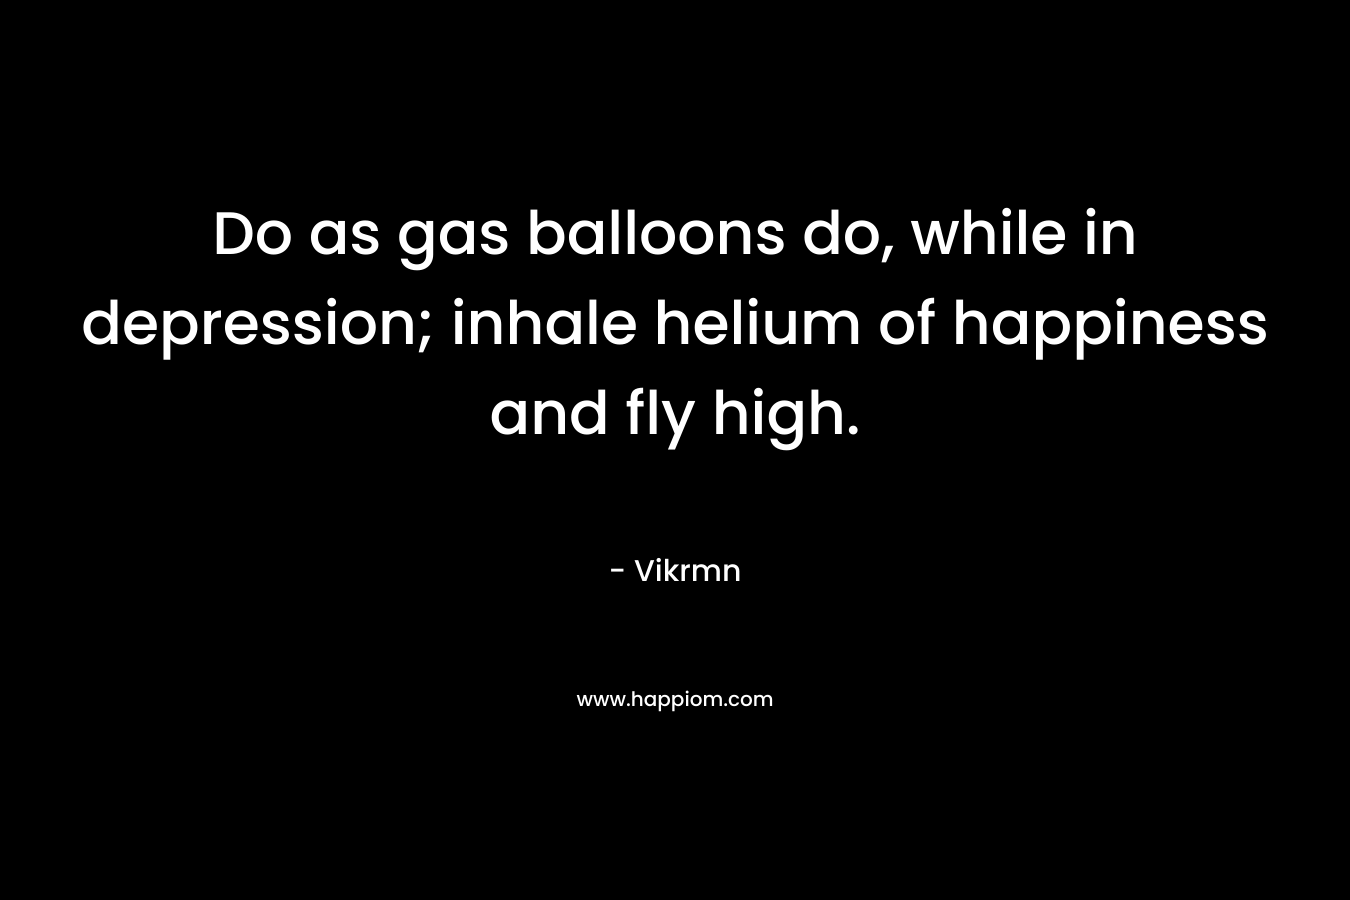 Do as gas balloons do, while in depression; inhale helium of happiness and fly high. – Vikrmn